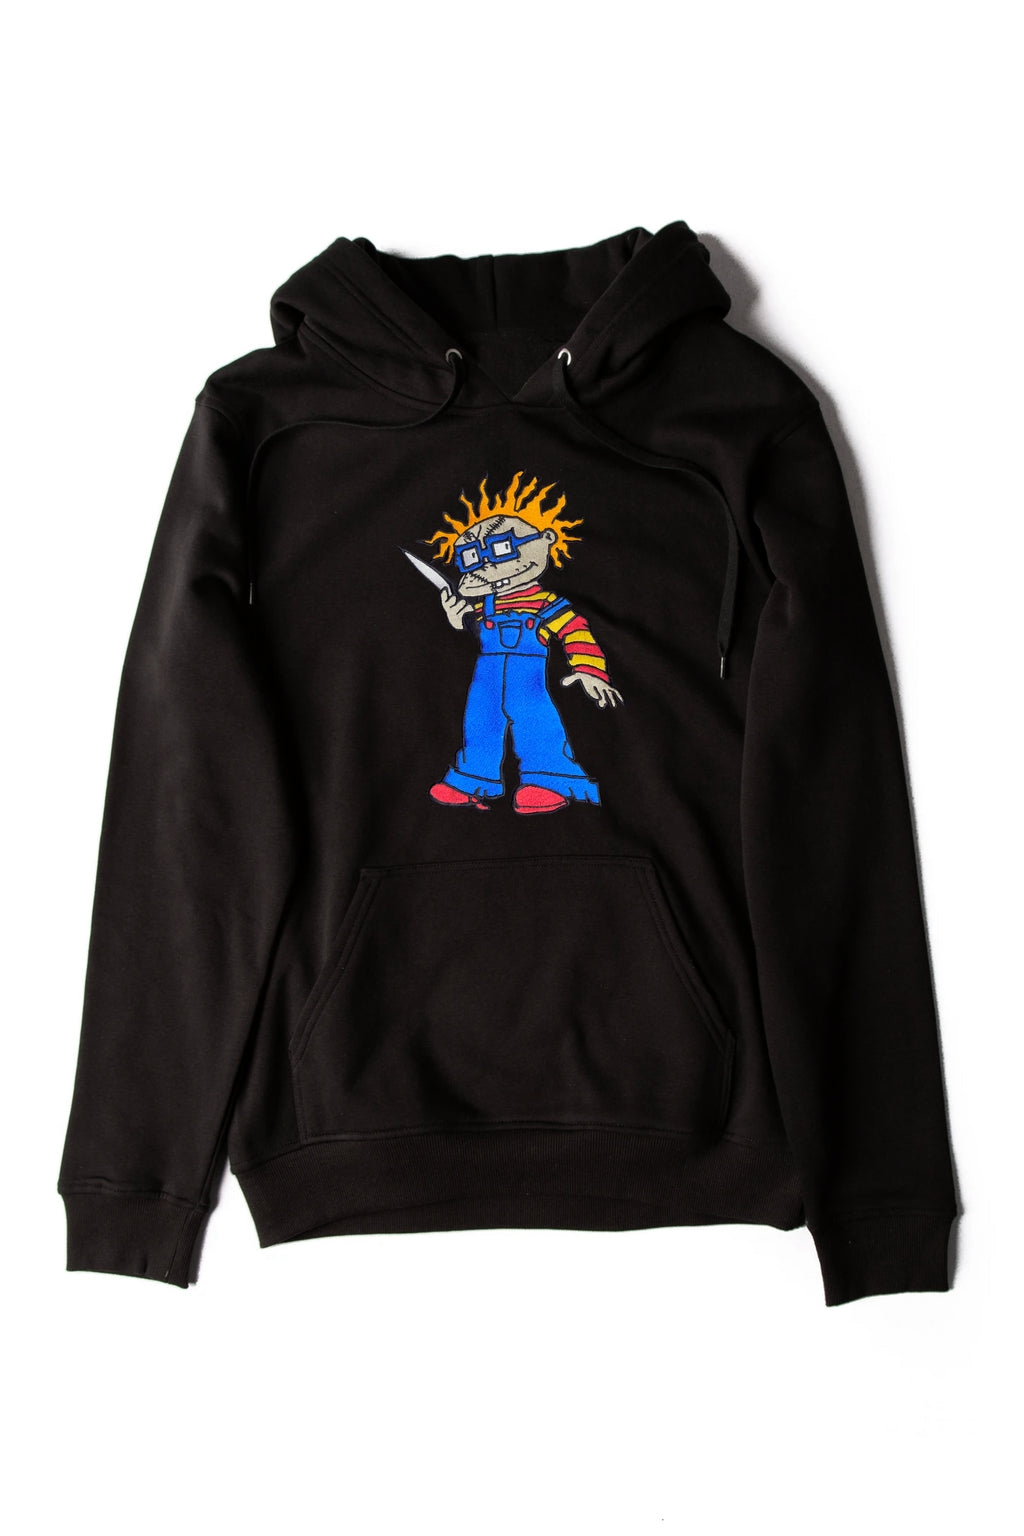 Lil' Killa Embroidered Hoodie LIMITED EDITION